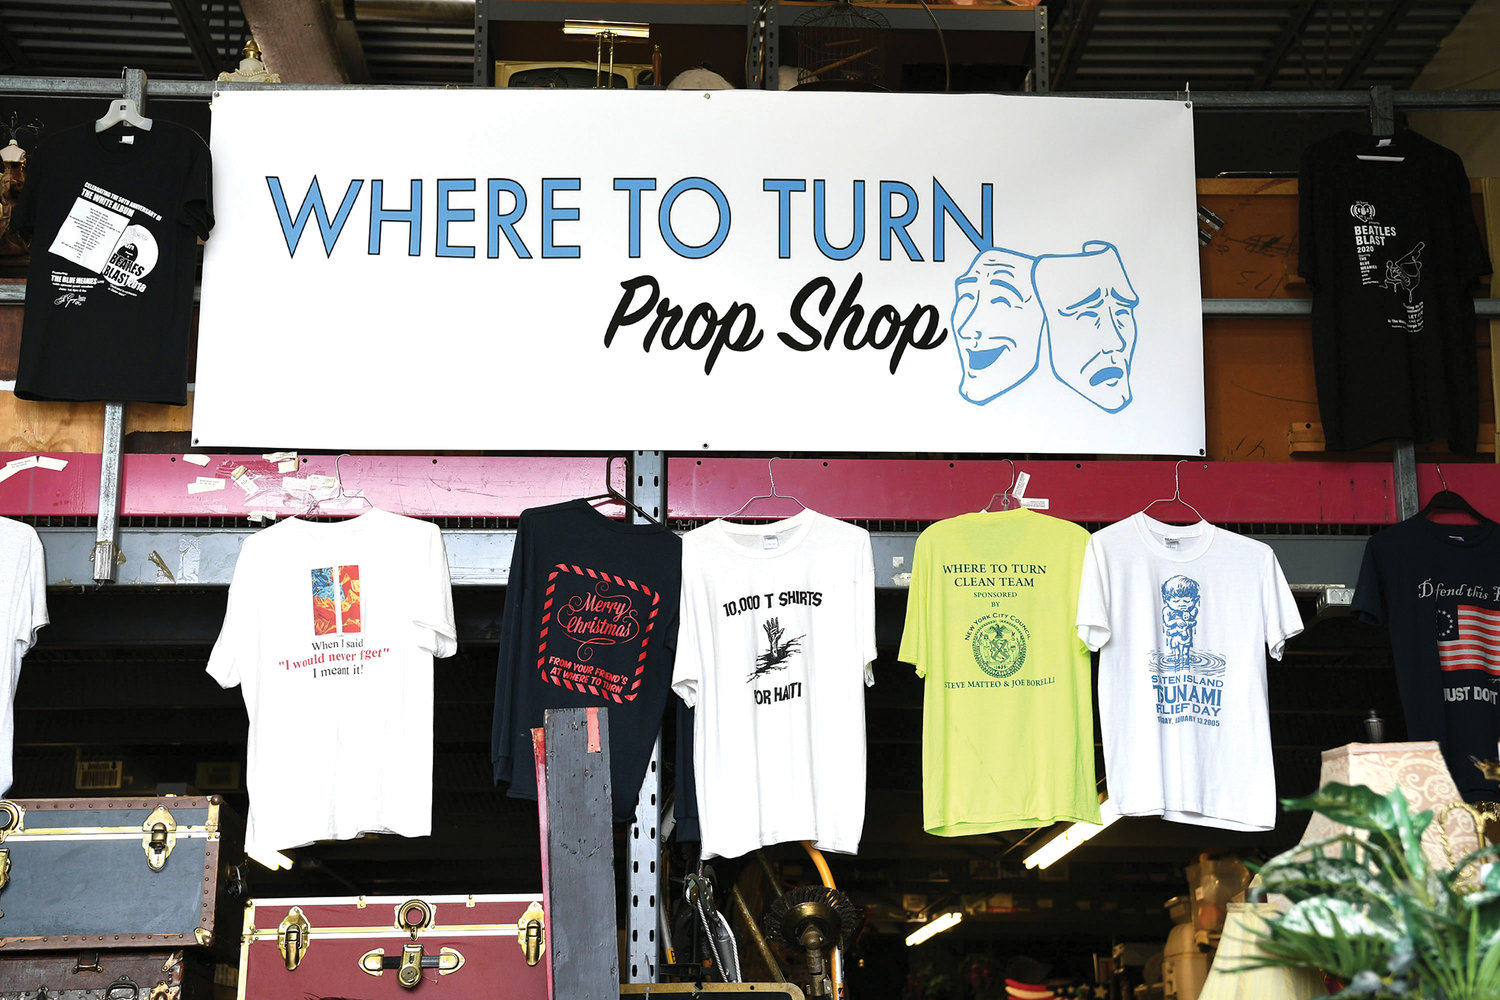 A sign and display of T-shirts welcome visitors to the Prop Shop, where numerous items are available for loan to local community theater groups and school productions. McKeon belongs to St. Clare parish on Staten Island.